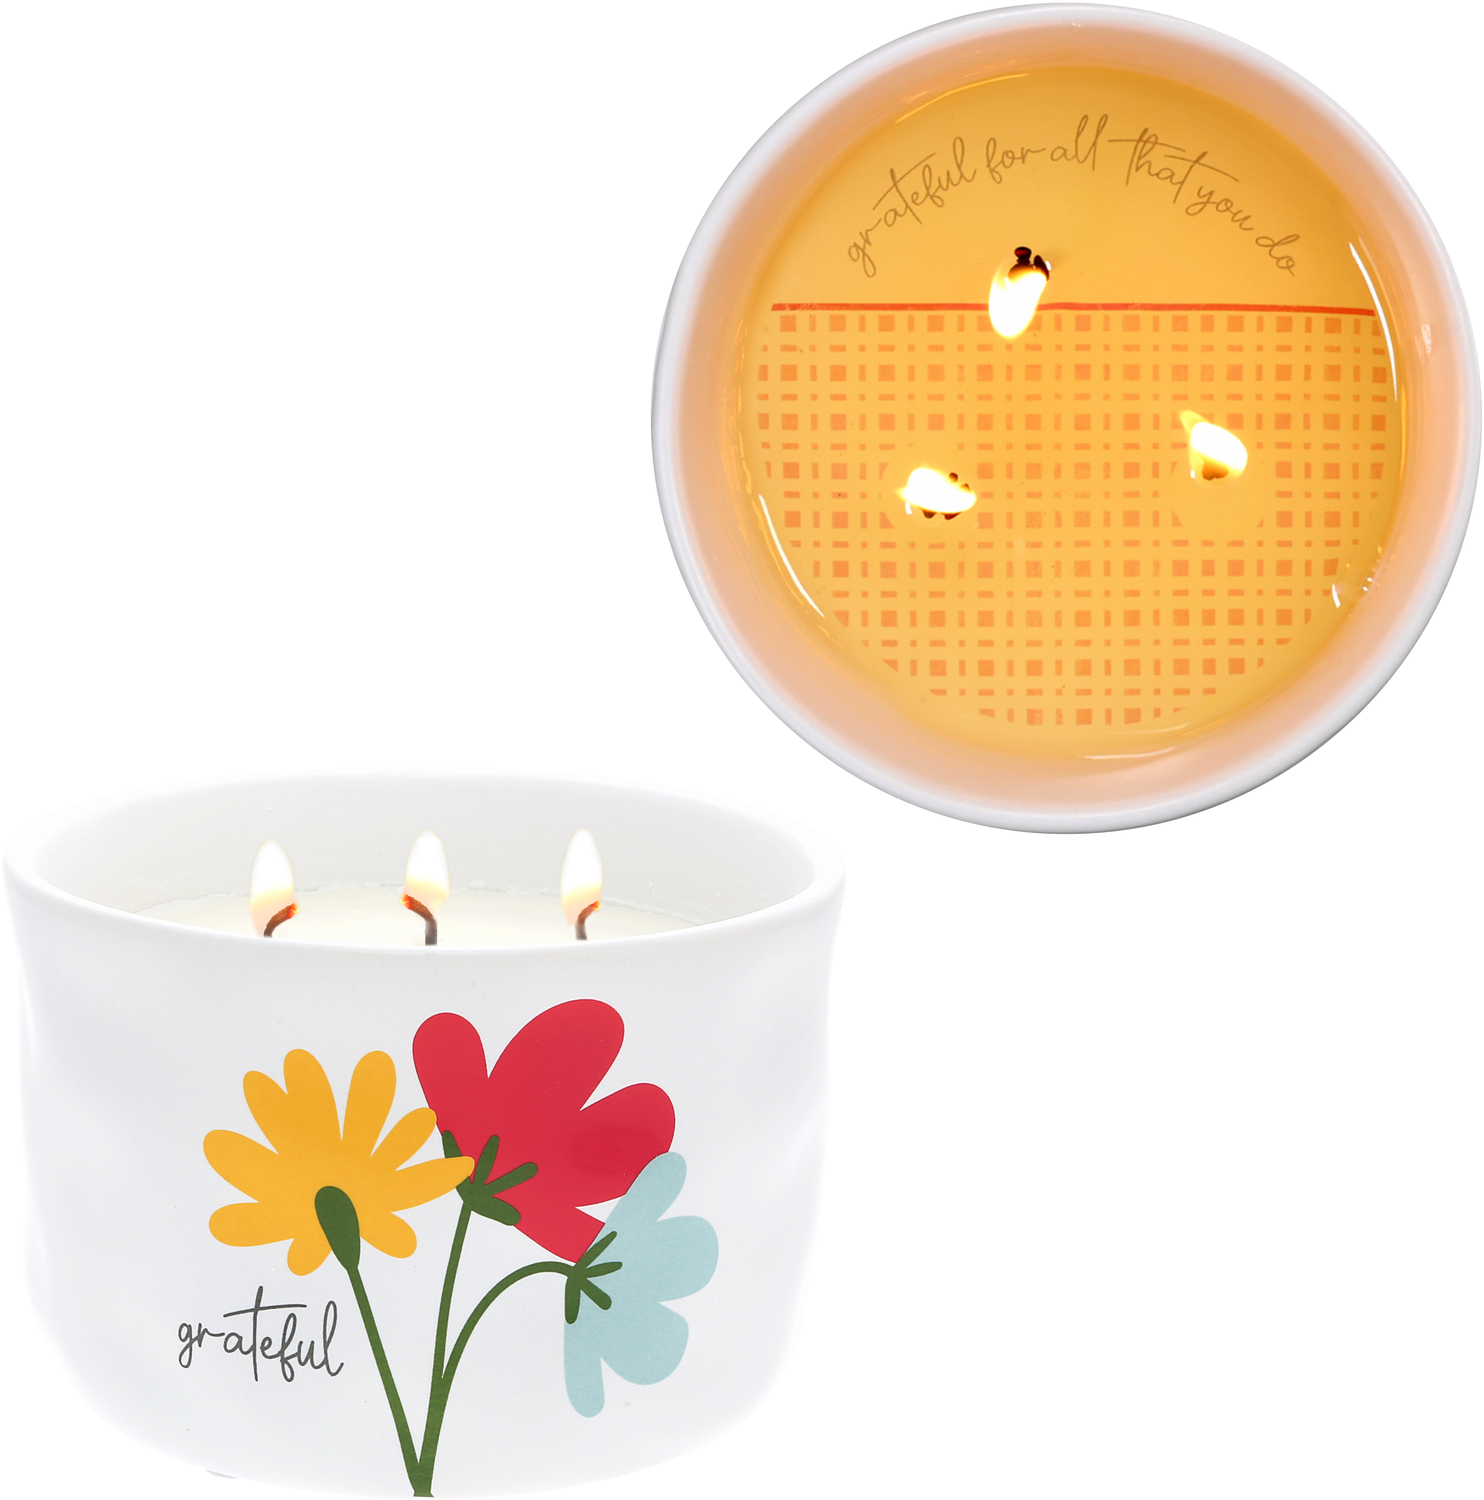 Grateful by Grateful Garden - Grateful - 12 oz - 100% Soy Wax Reveal Triple Wick Candle
Scent: Tranquility